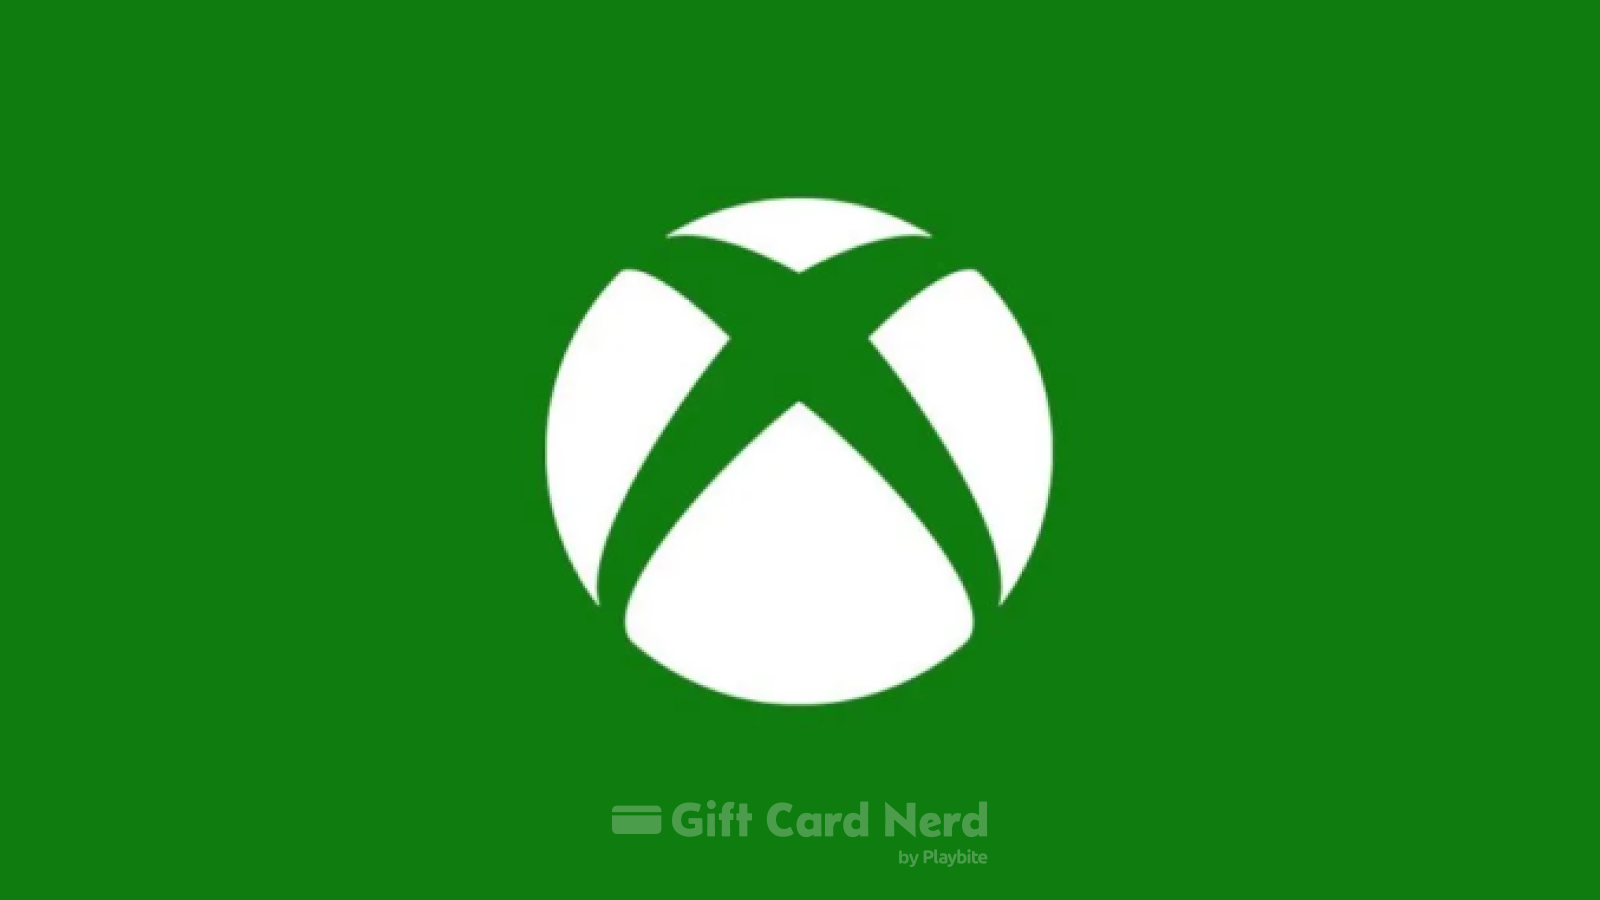 Can I Use an Xbox Gift Card on Uber Eats?